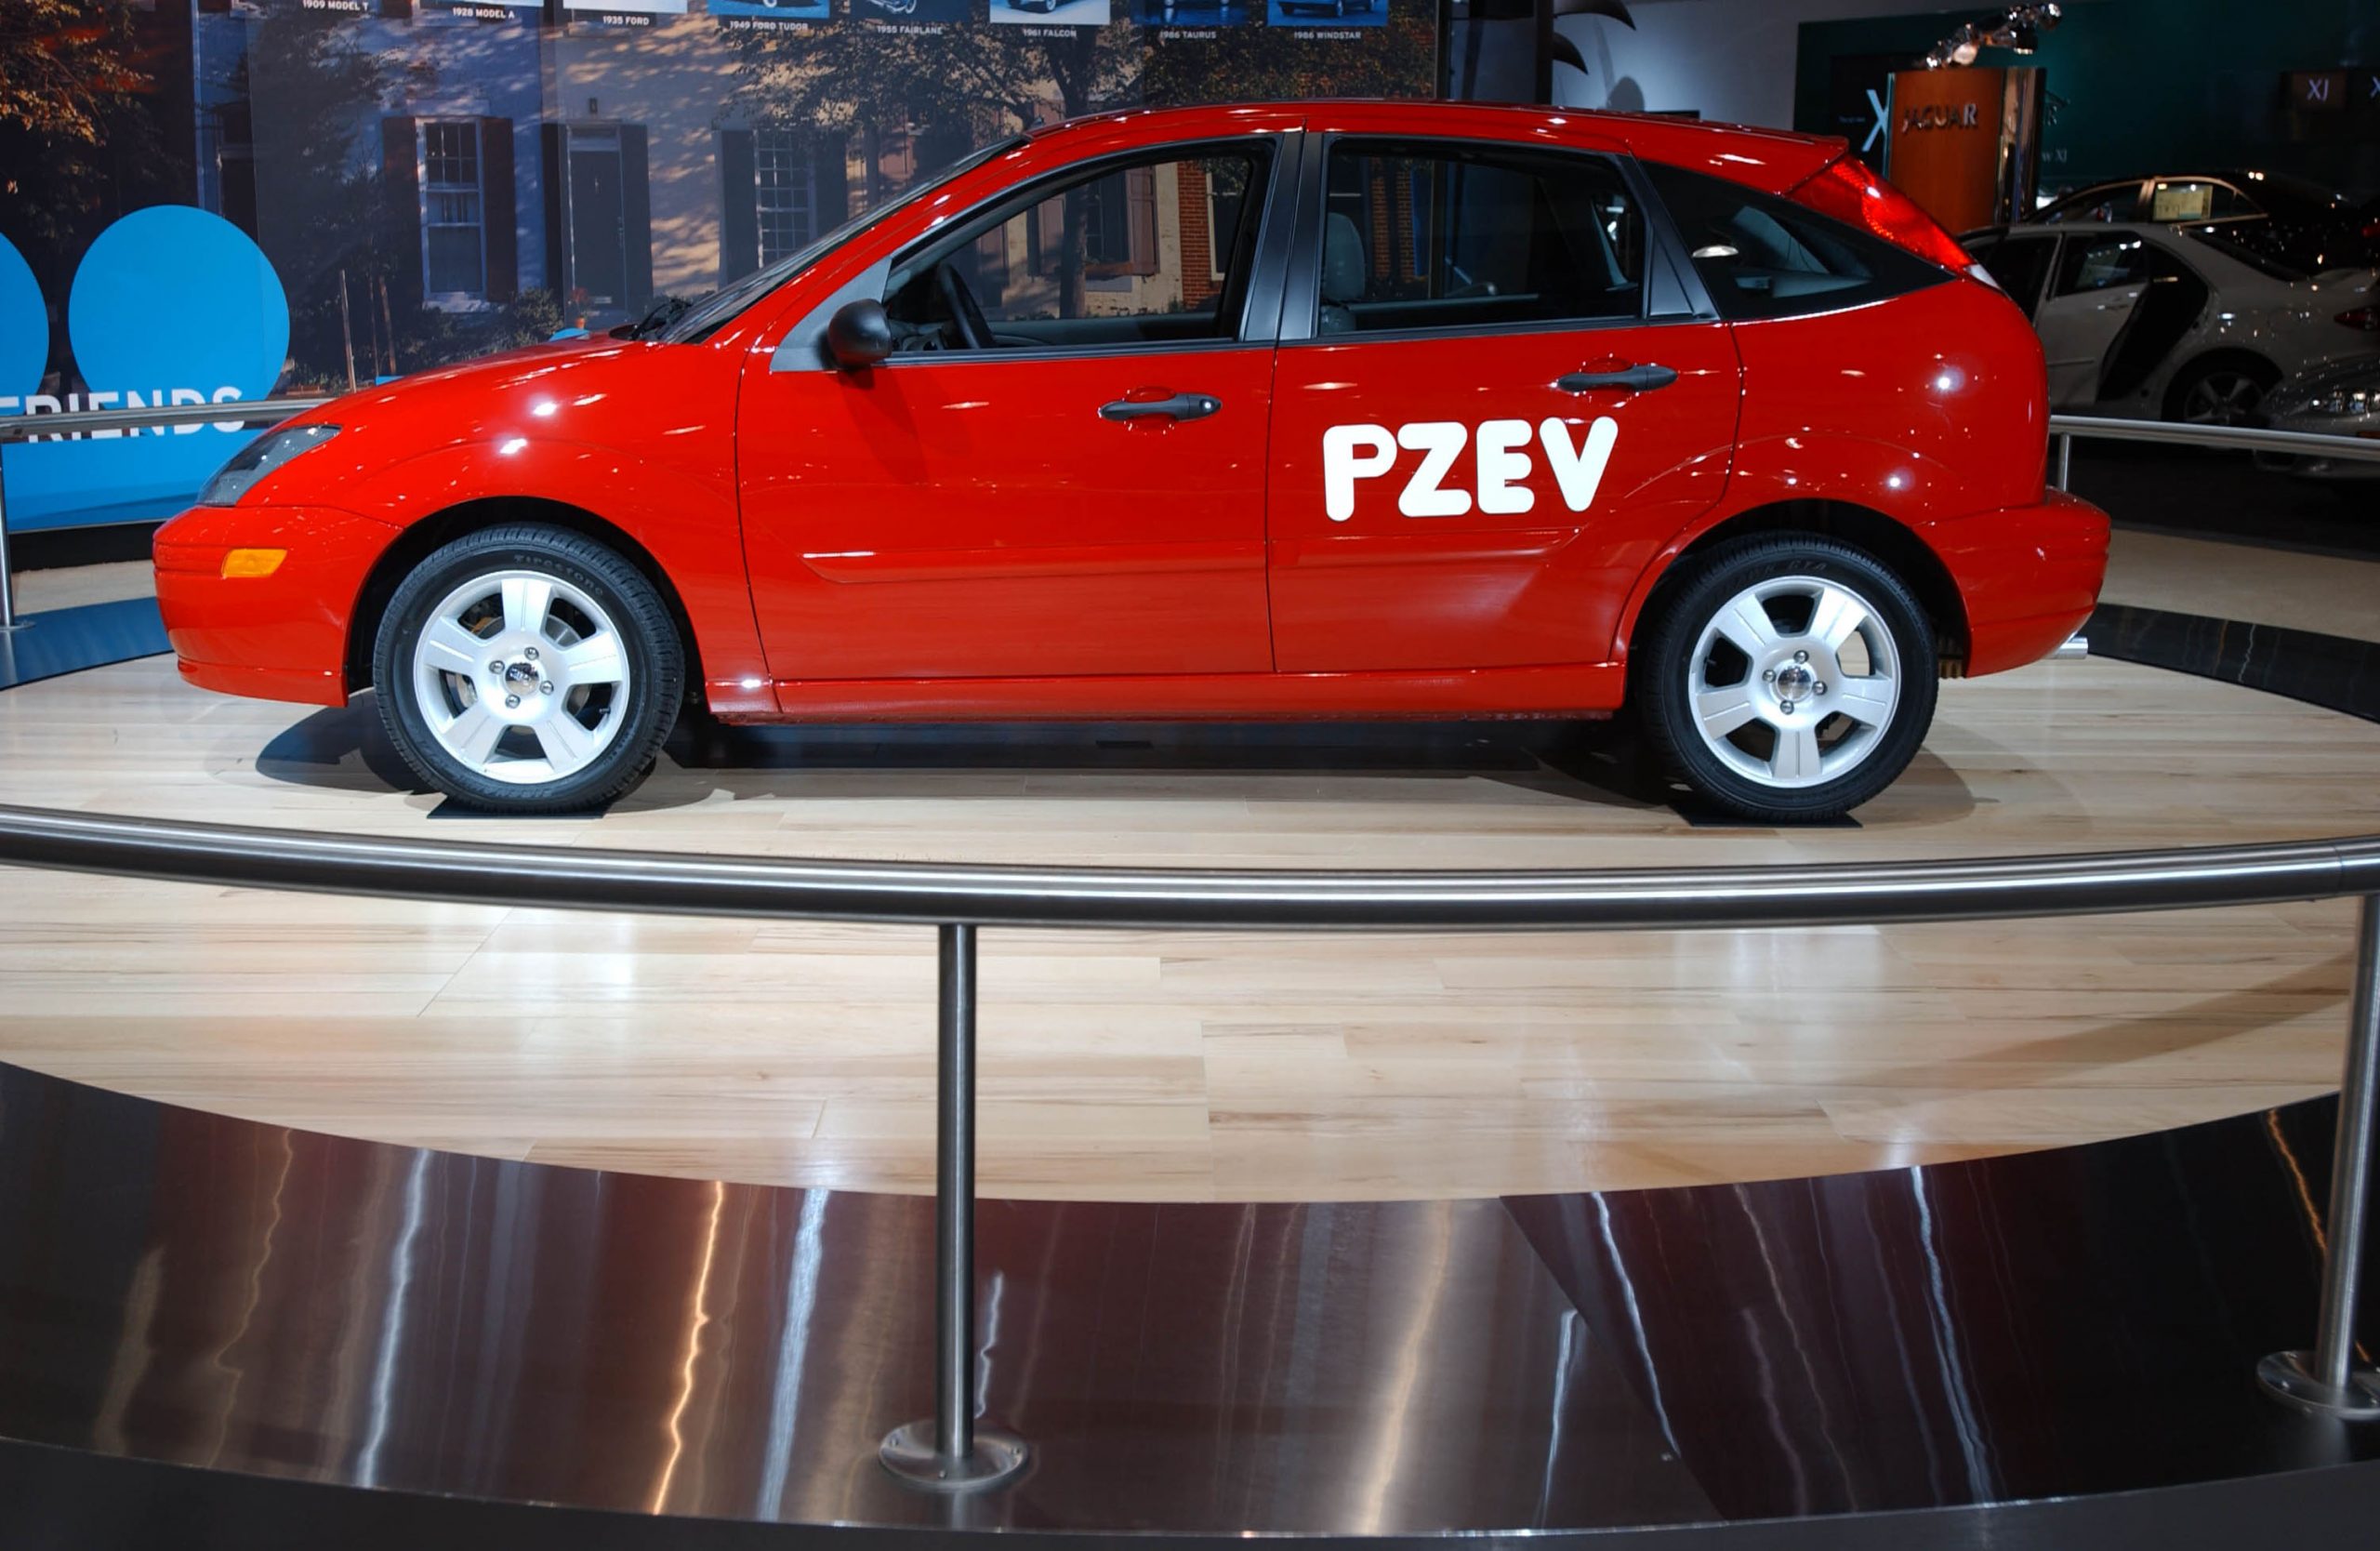 A Ford Focus PZEV on display at an auto show